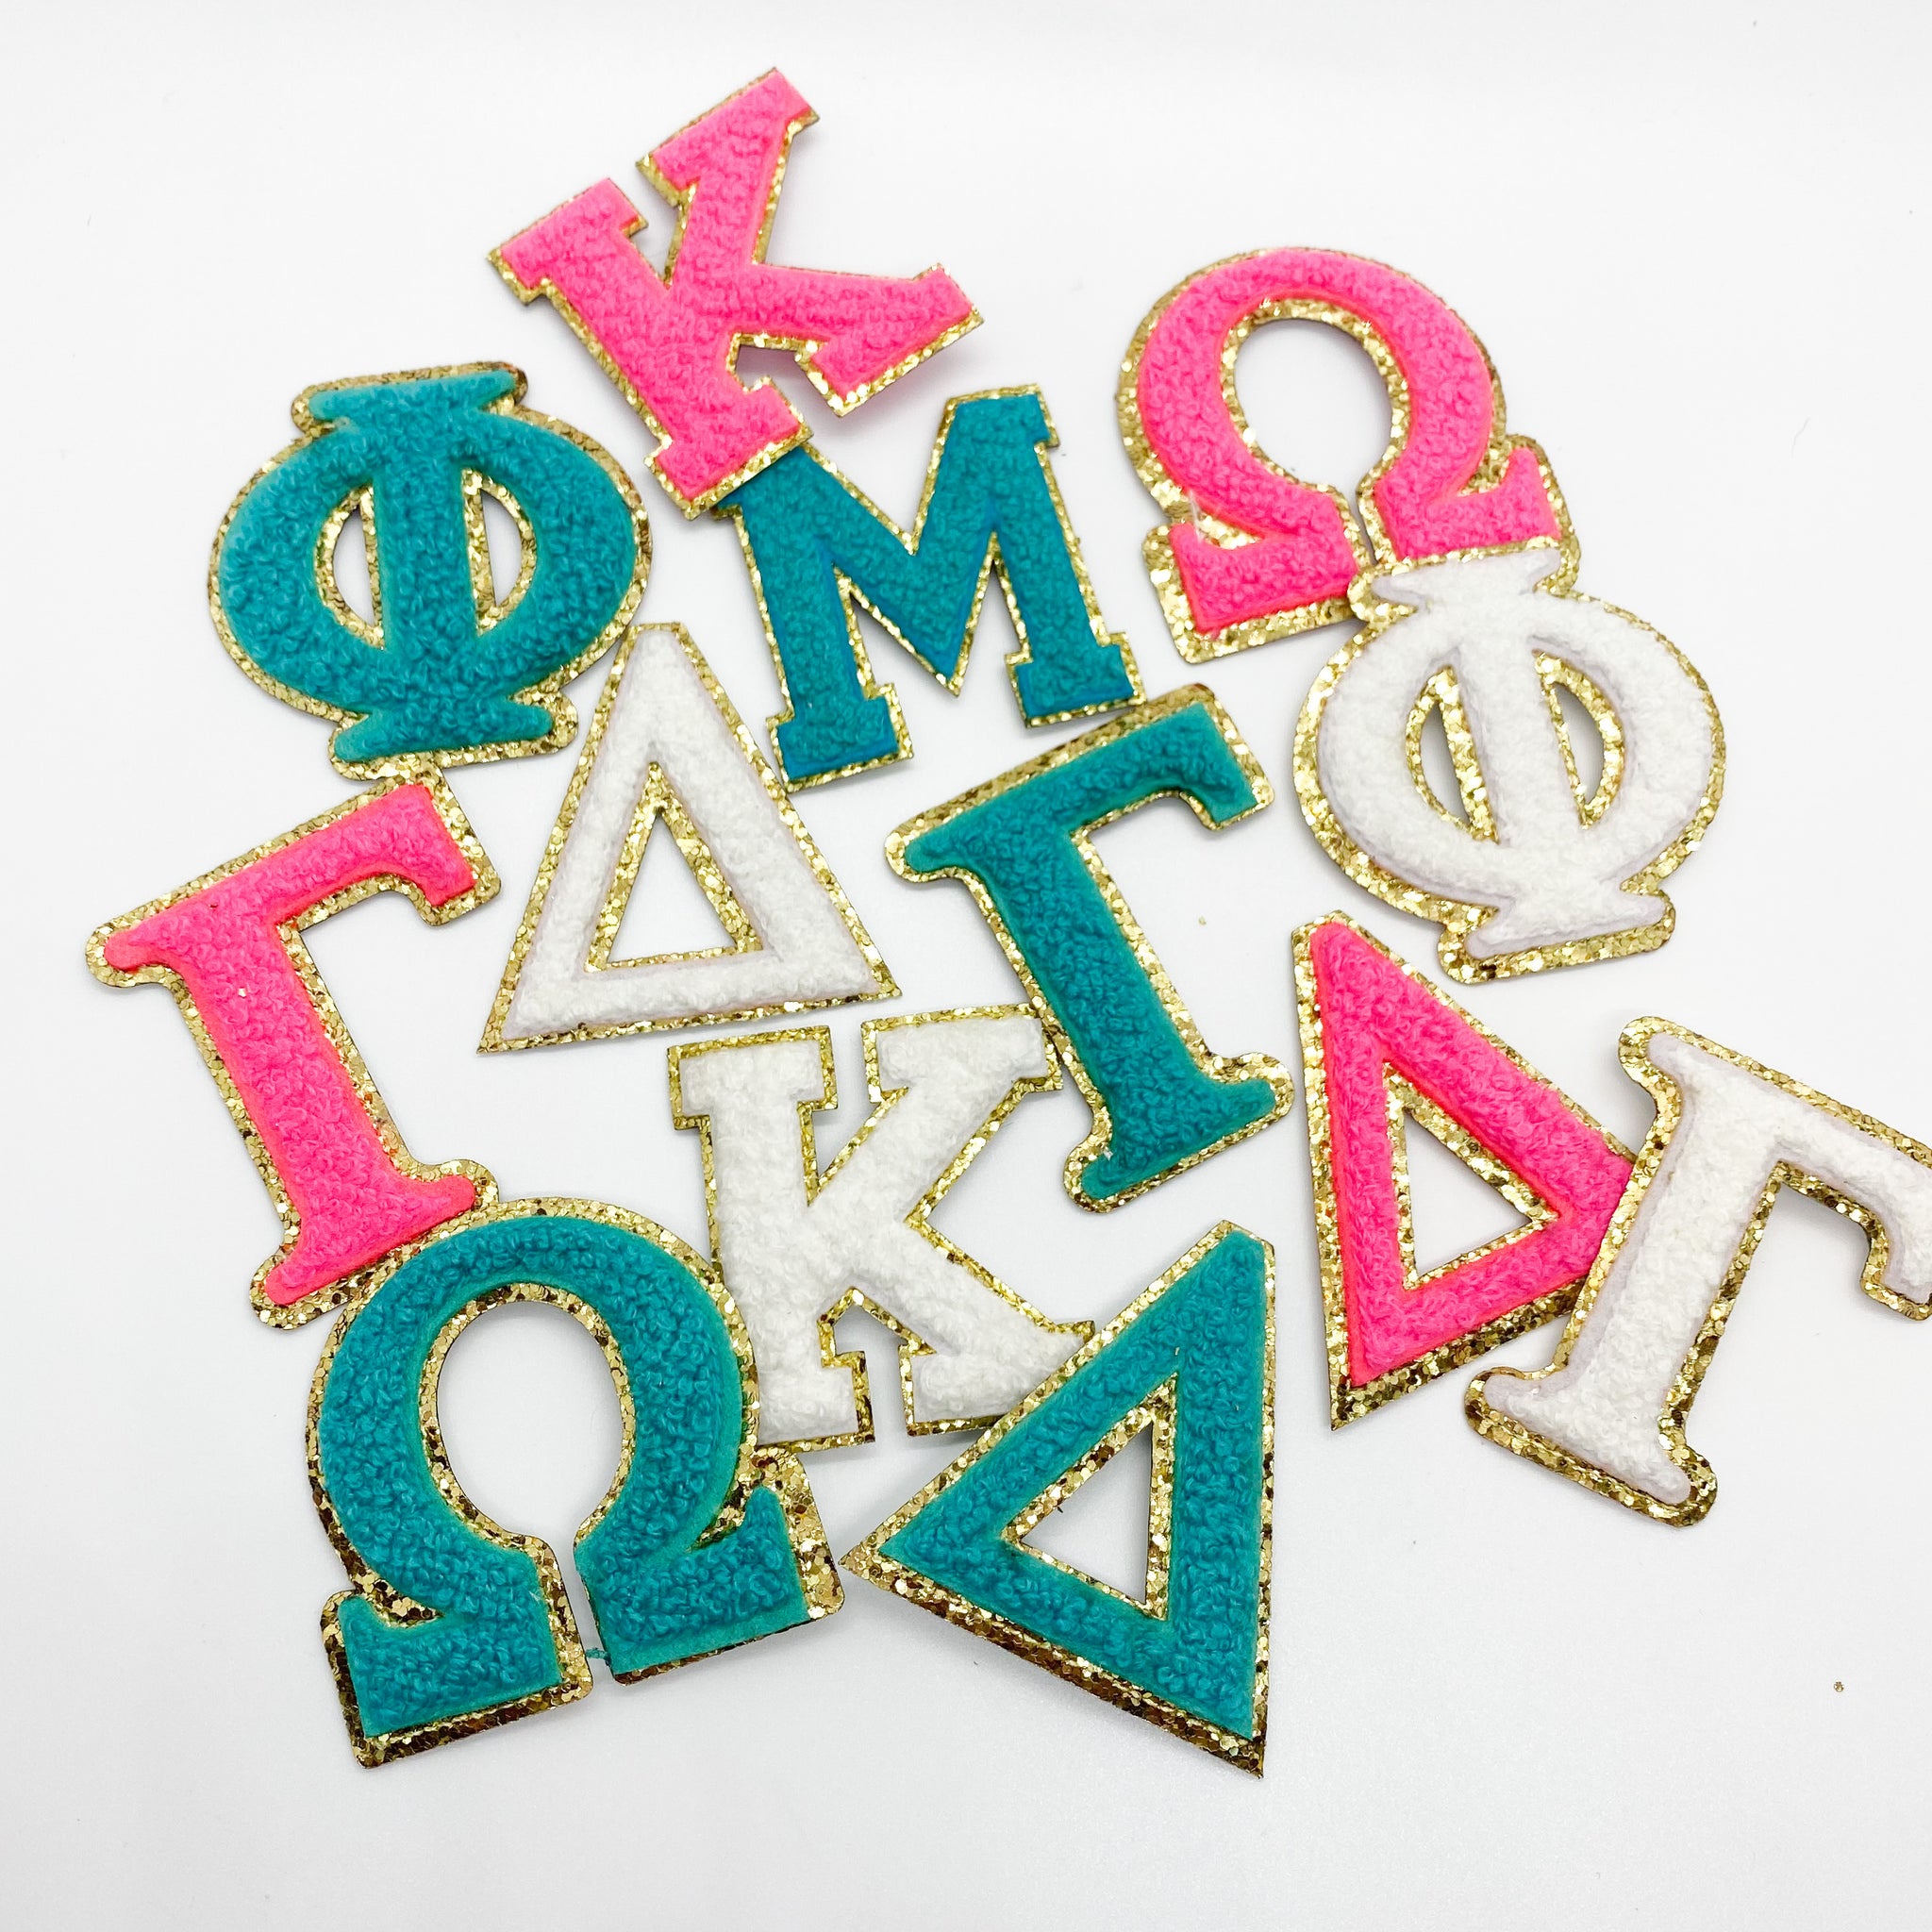 1 Iron-On Glitter Letters by Make Market®